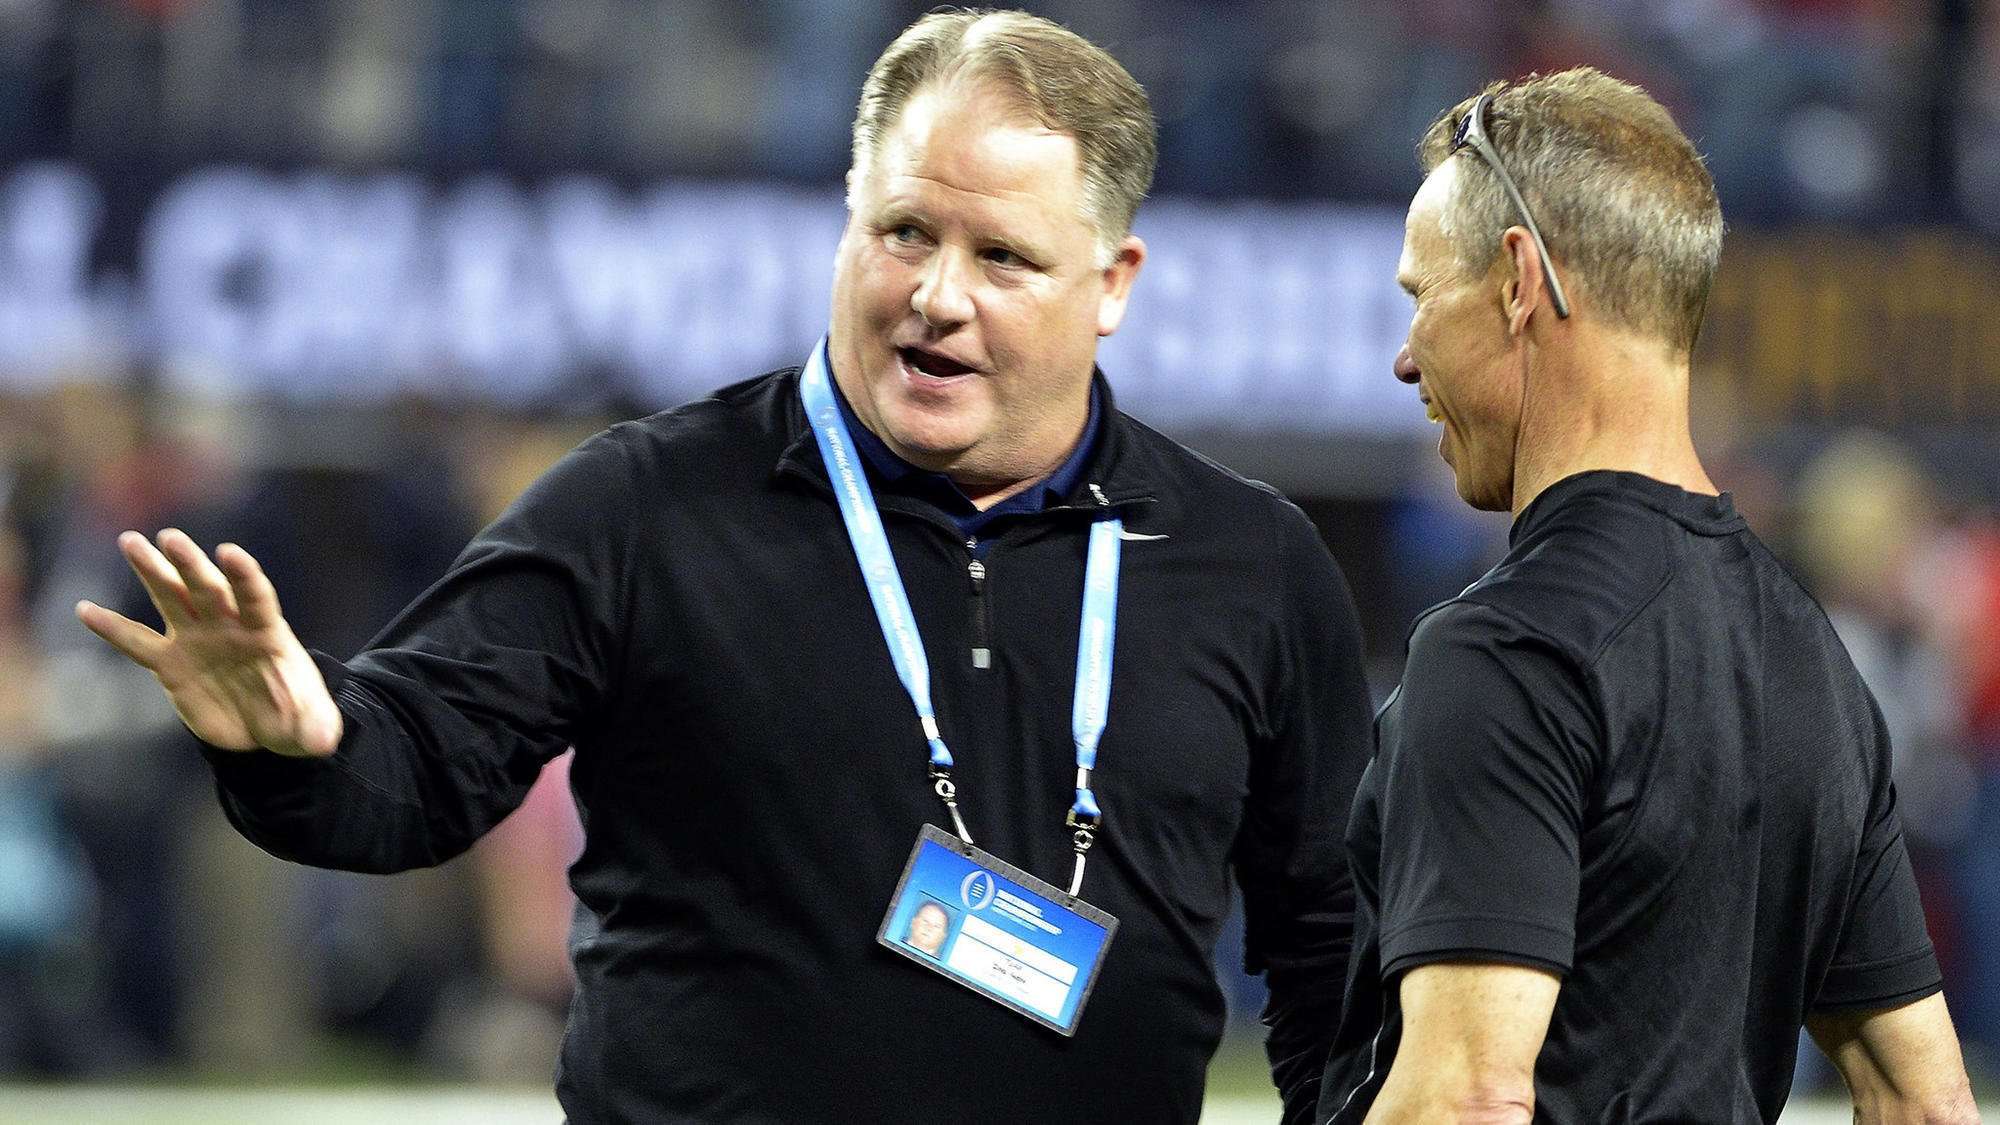 image for UCLA hires Chip Kelly as football coach with a five-year, $23.3-million contract